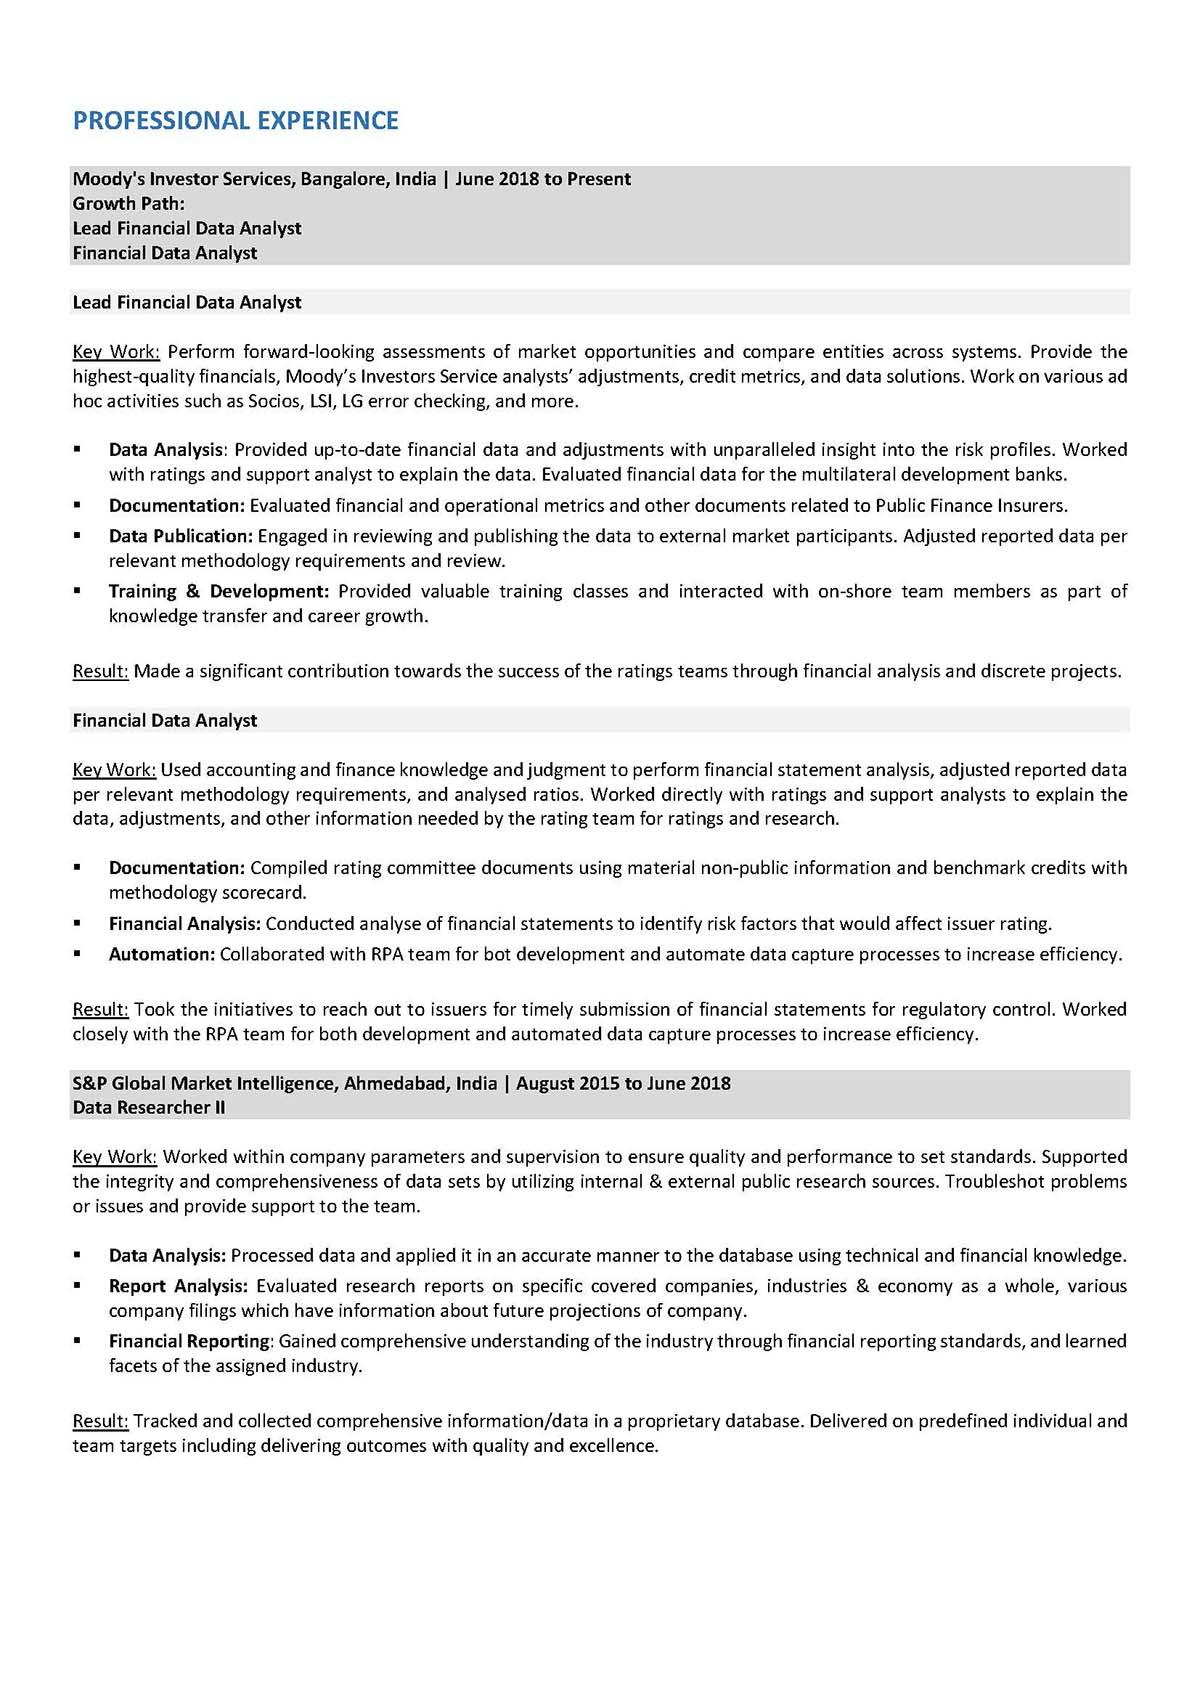 Sample resume: Investment Management, Mid Experience, Combination